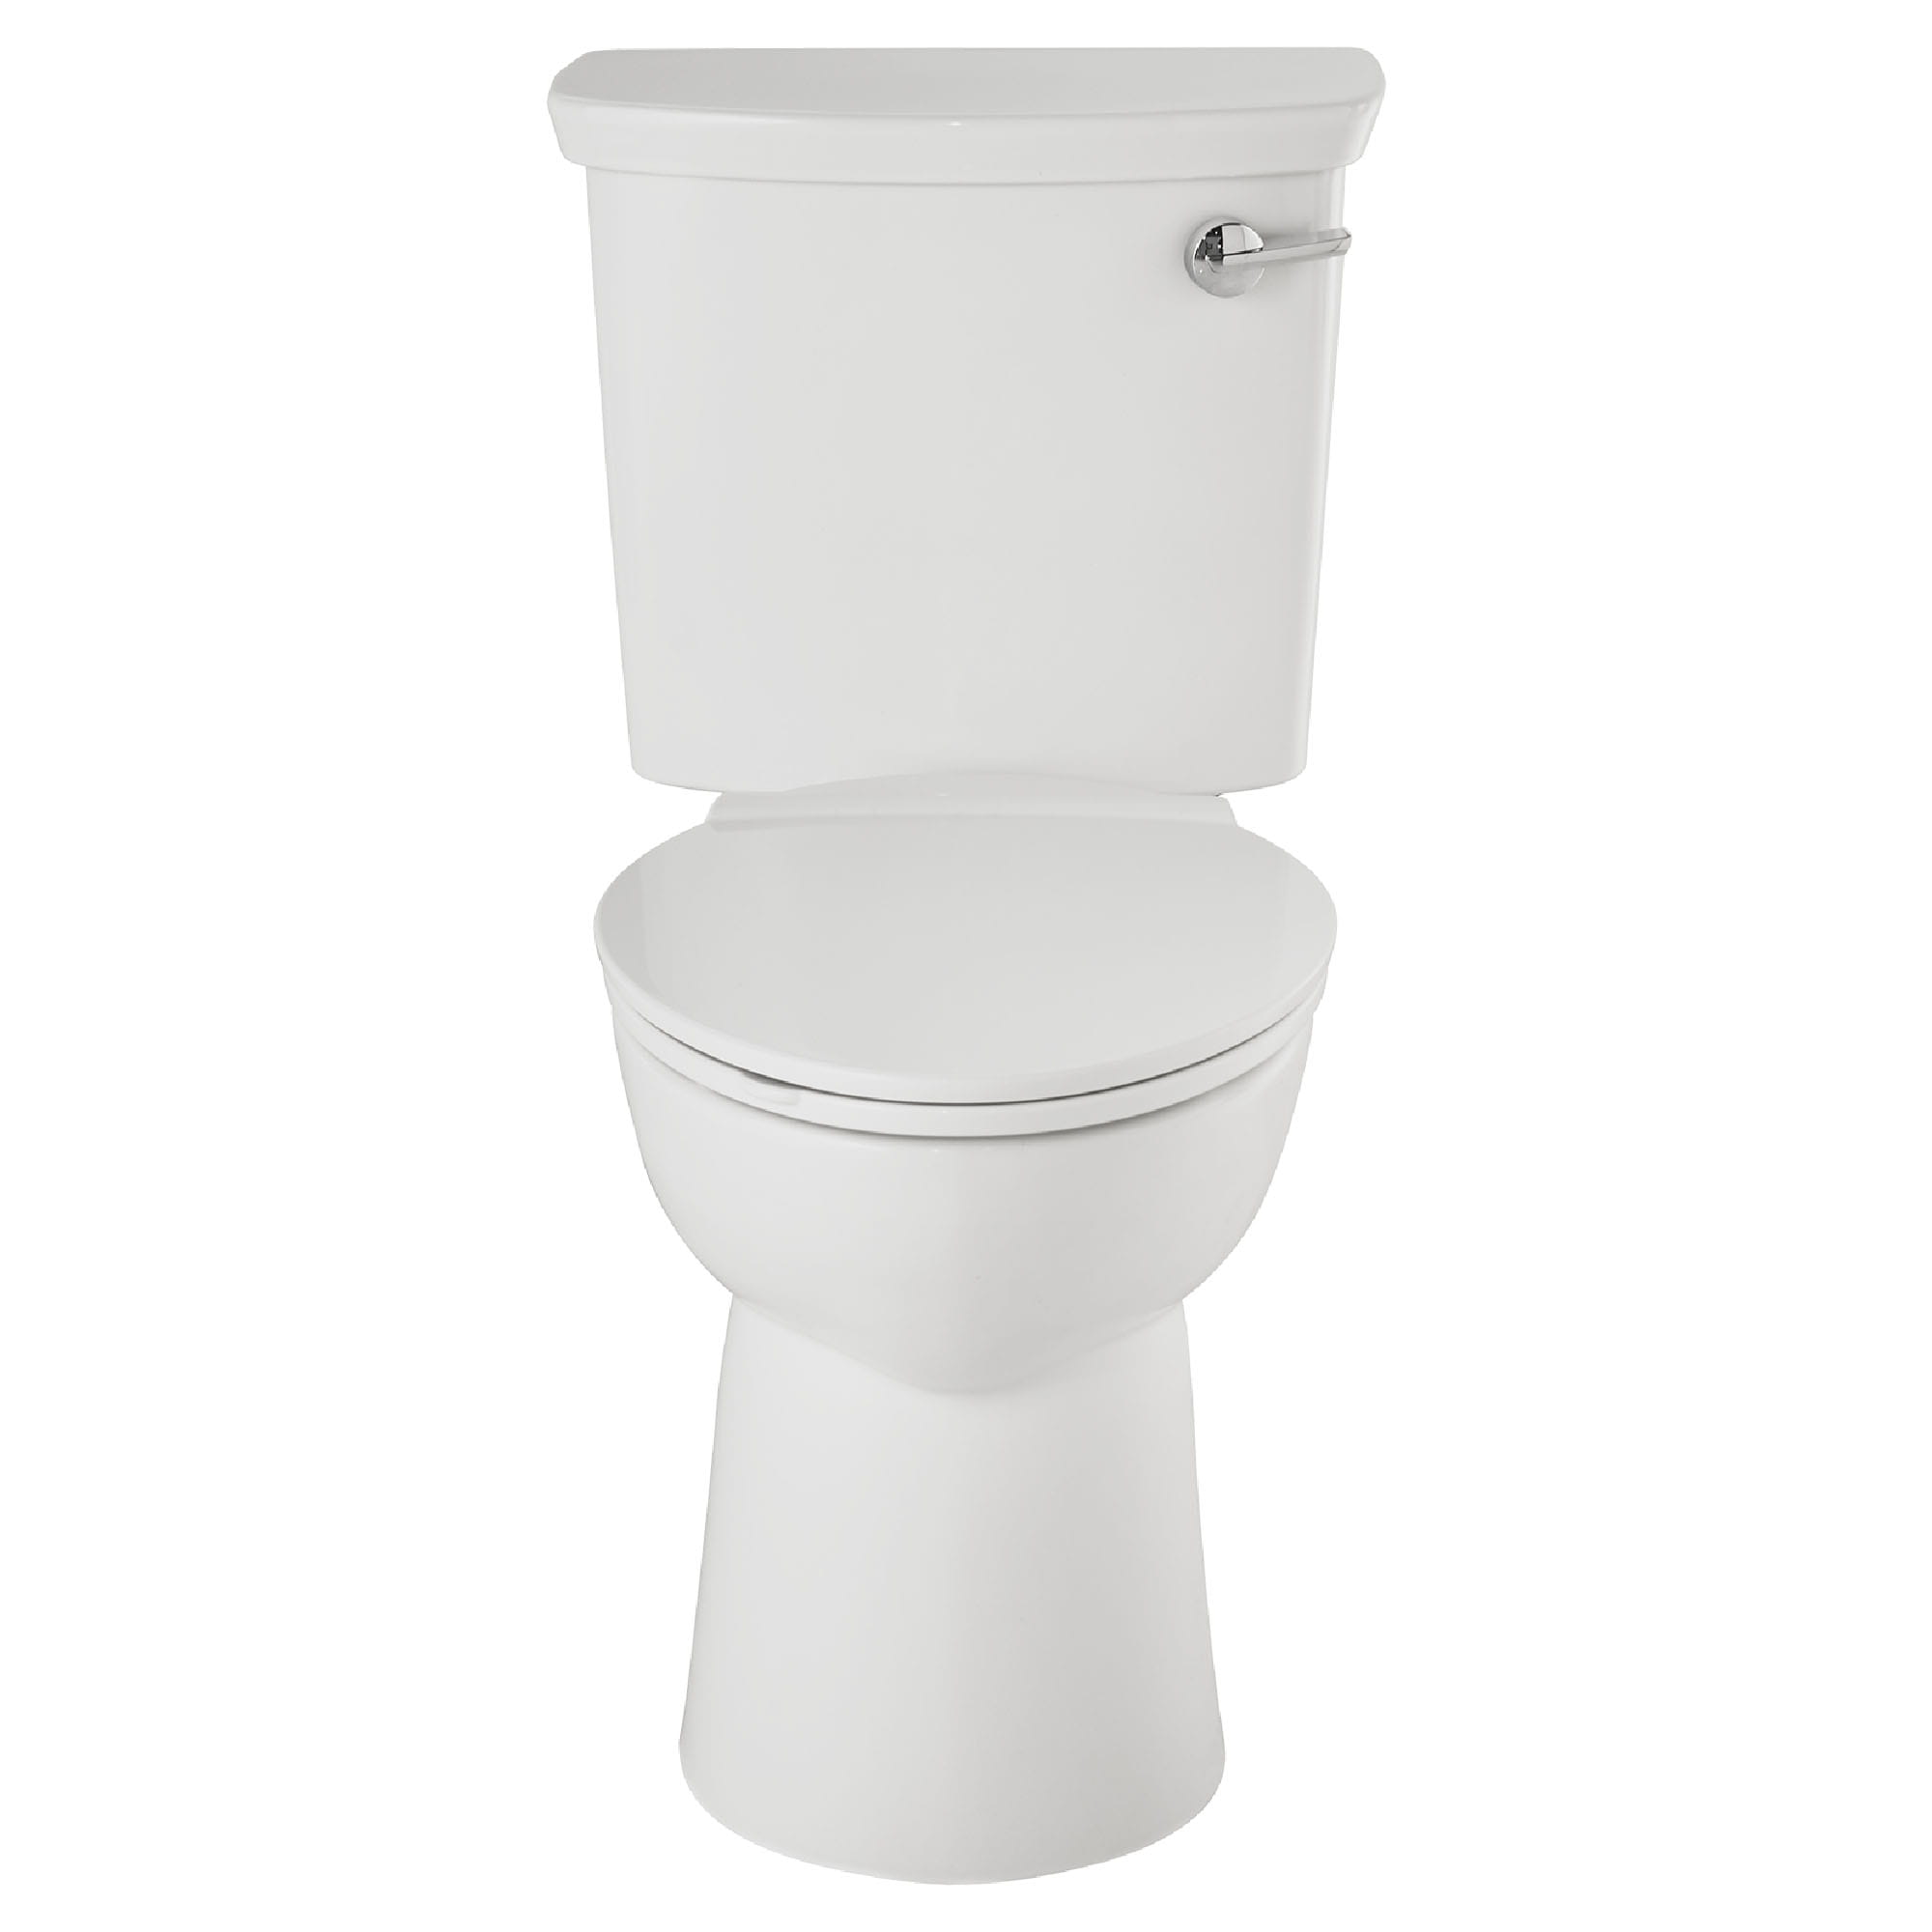 VorMax® Plus Two-Piece 1.0 gpf/3.8 Lpf Chair Height Right-Hand Trip Lever Elongated Toilet With Seat